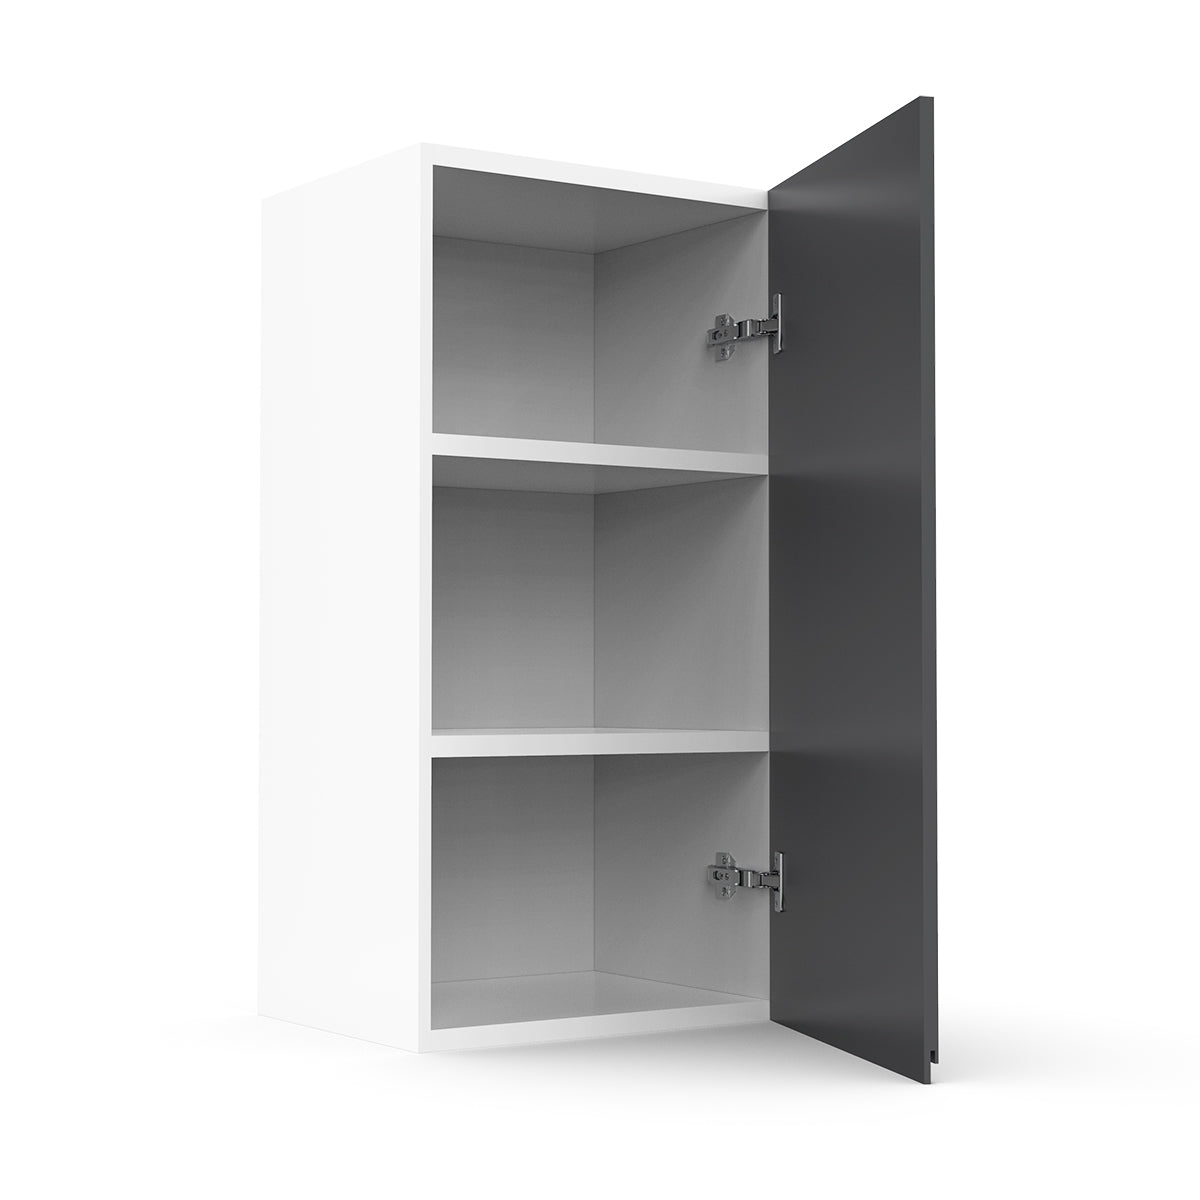 RTA - Lacquer Grey - Single Door Wall Cabinets | 15"W x 30"H x 12"D